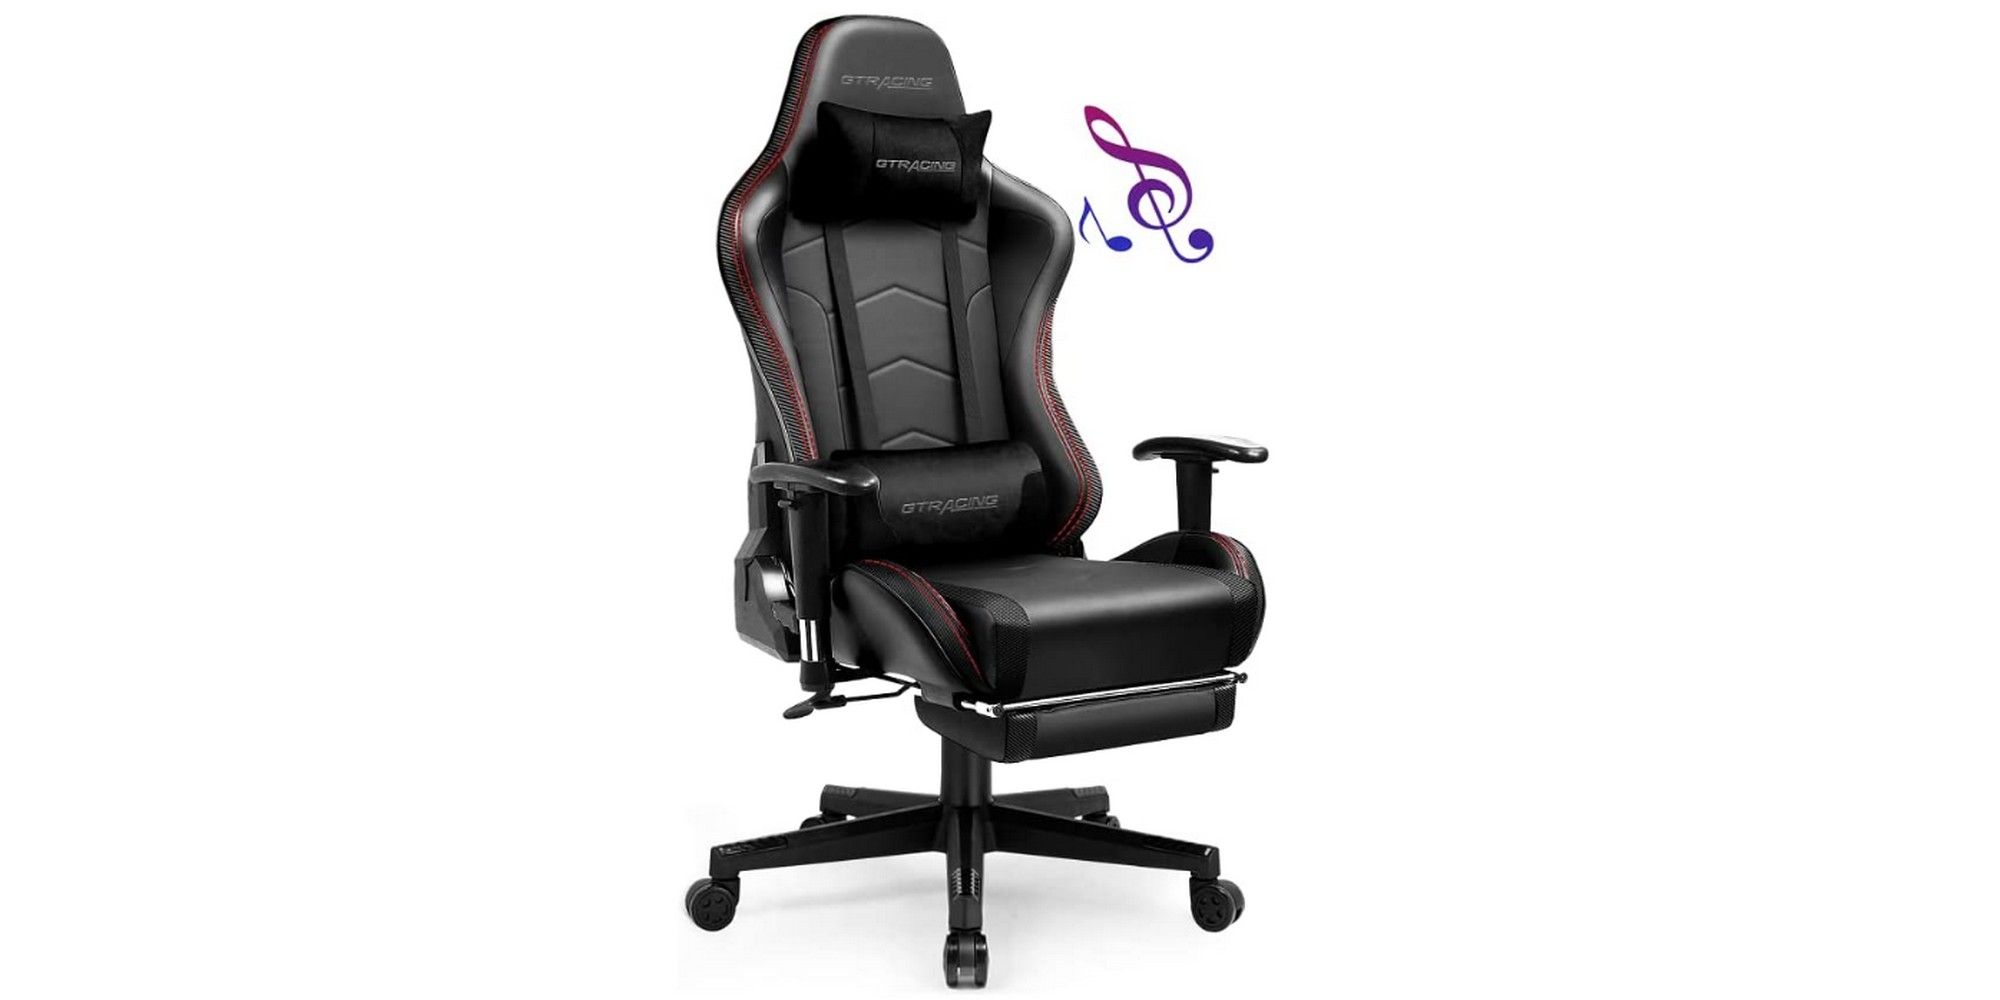 gtracing gaming chair footrest bluetooth buyer's guide